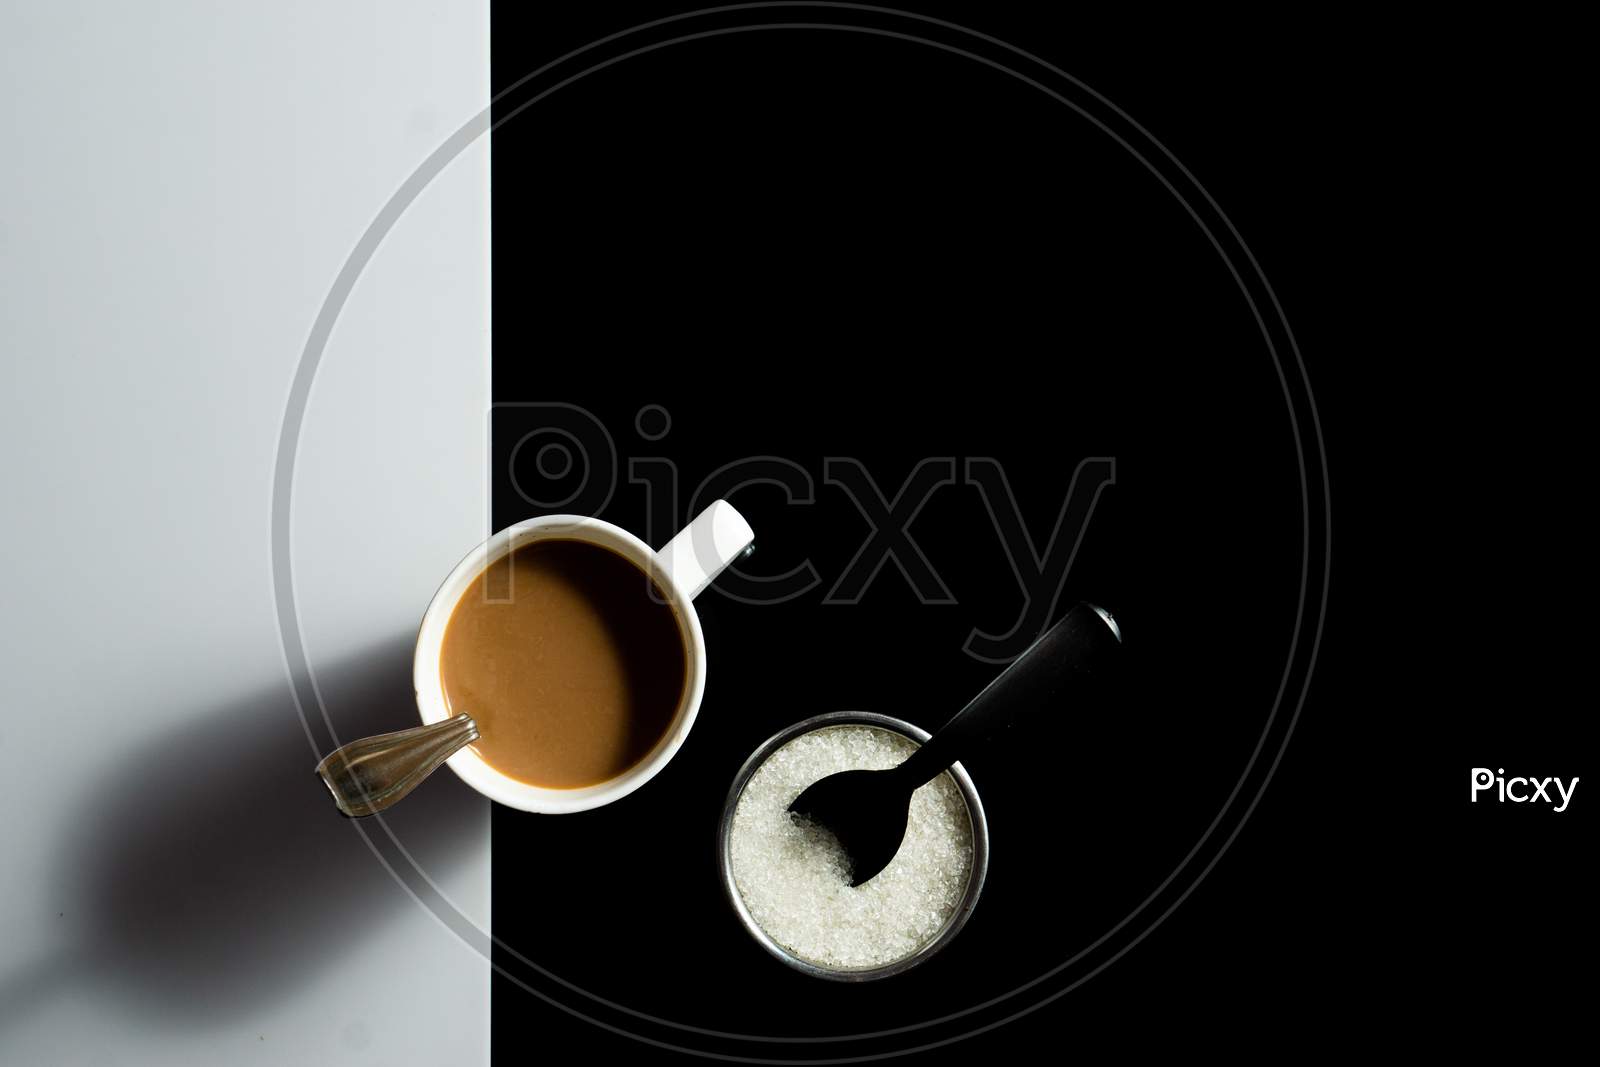 A Cup Of Tea And Sugar On A Black And White Background